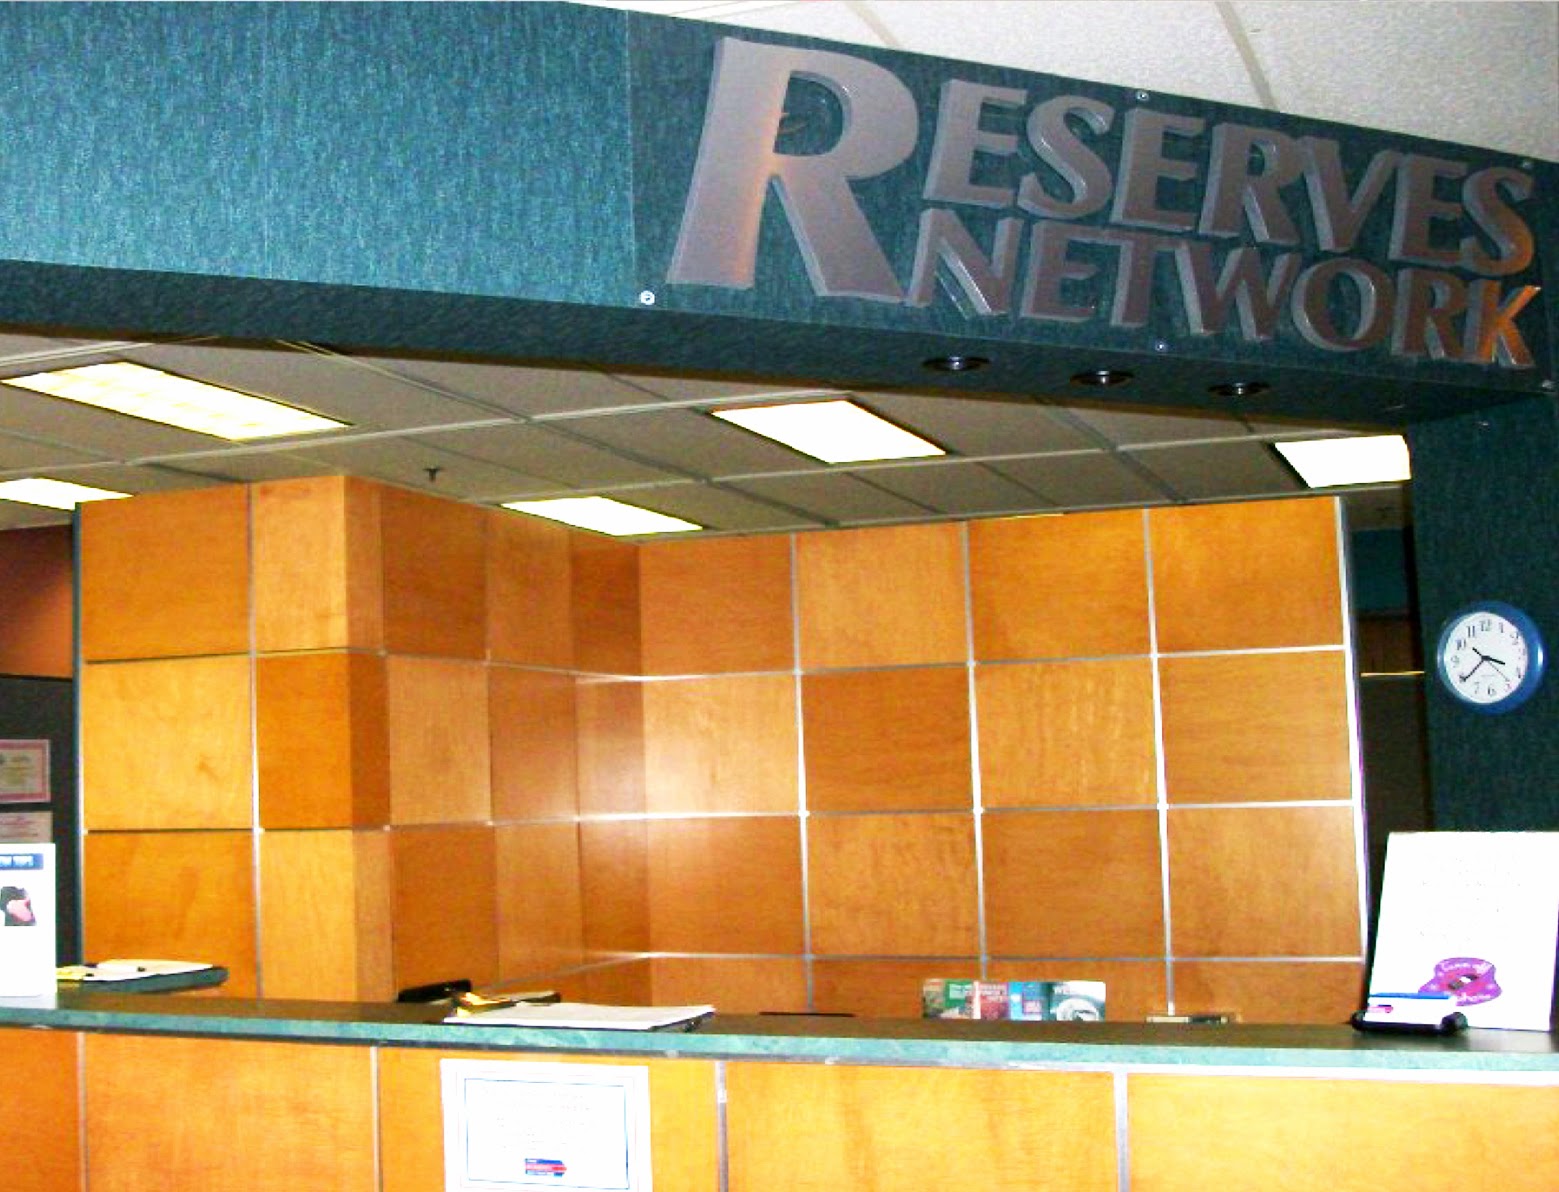 The Reserves Network 4749 W, 4749 Lincoln Mall Dr Ste 100, Matteson Illinois 60443